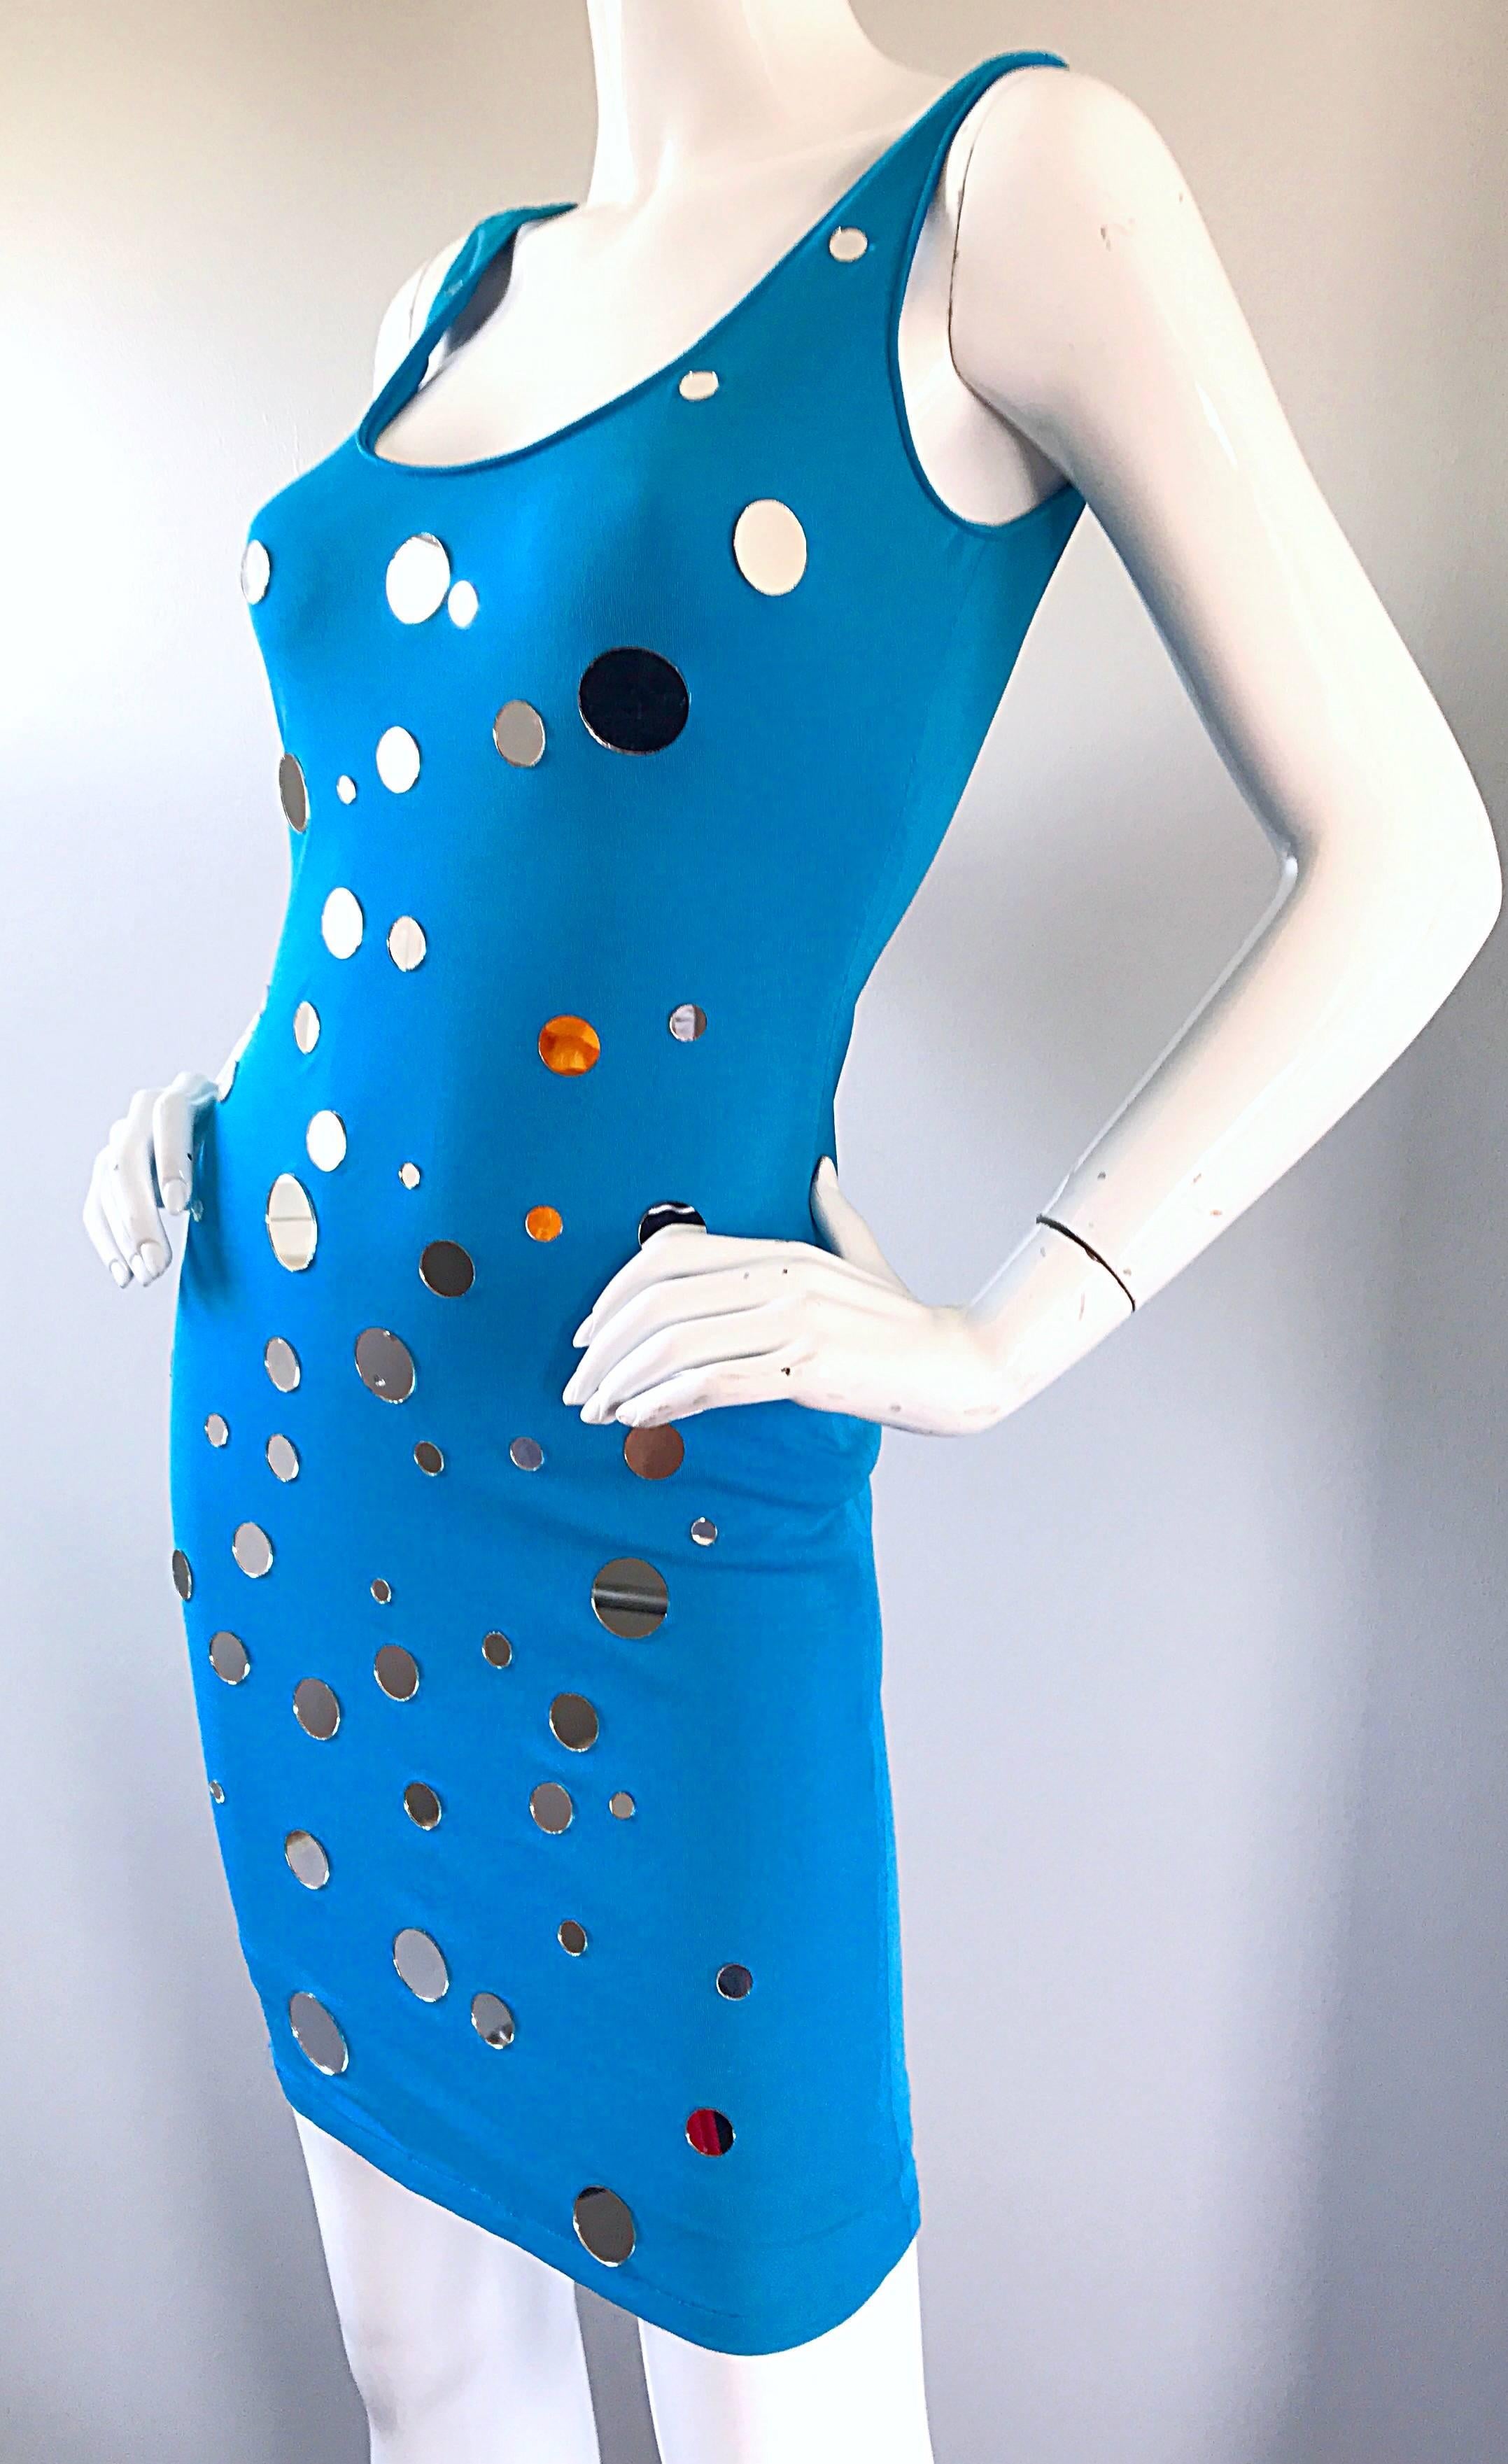 Documented C.D. Greene Turquoise Teal Blue Vintage Mirrored Bodycon Beaded Dress 1